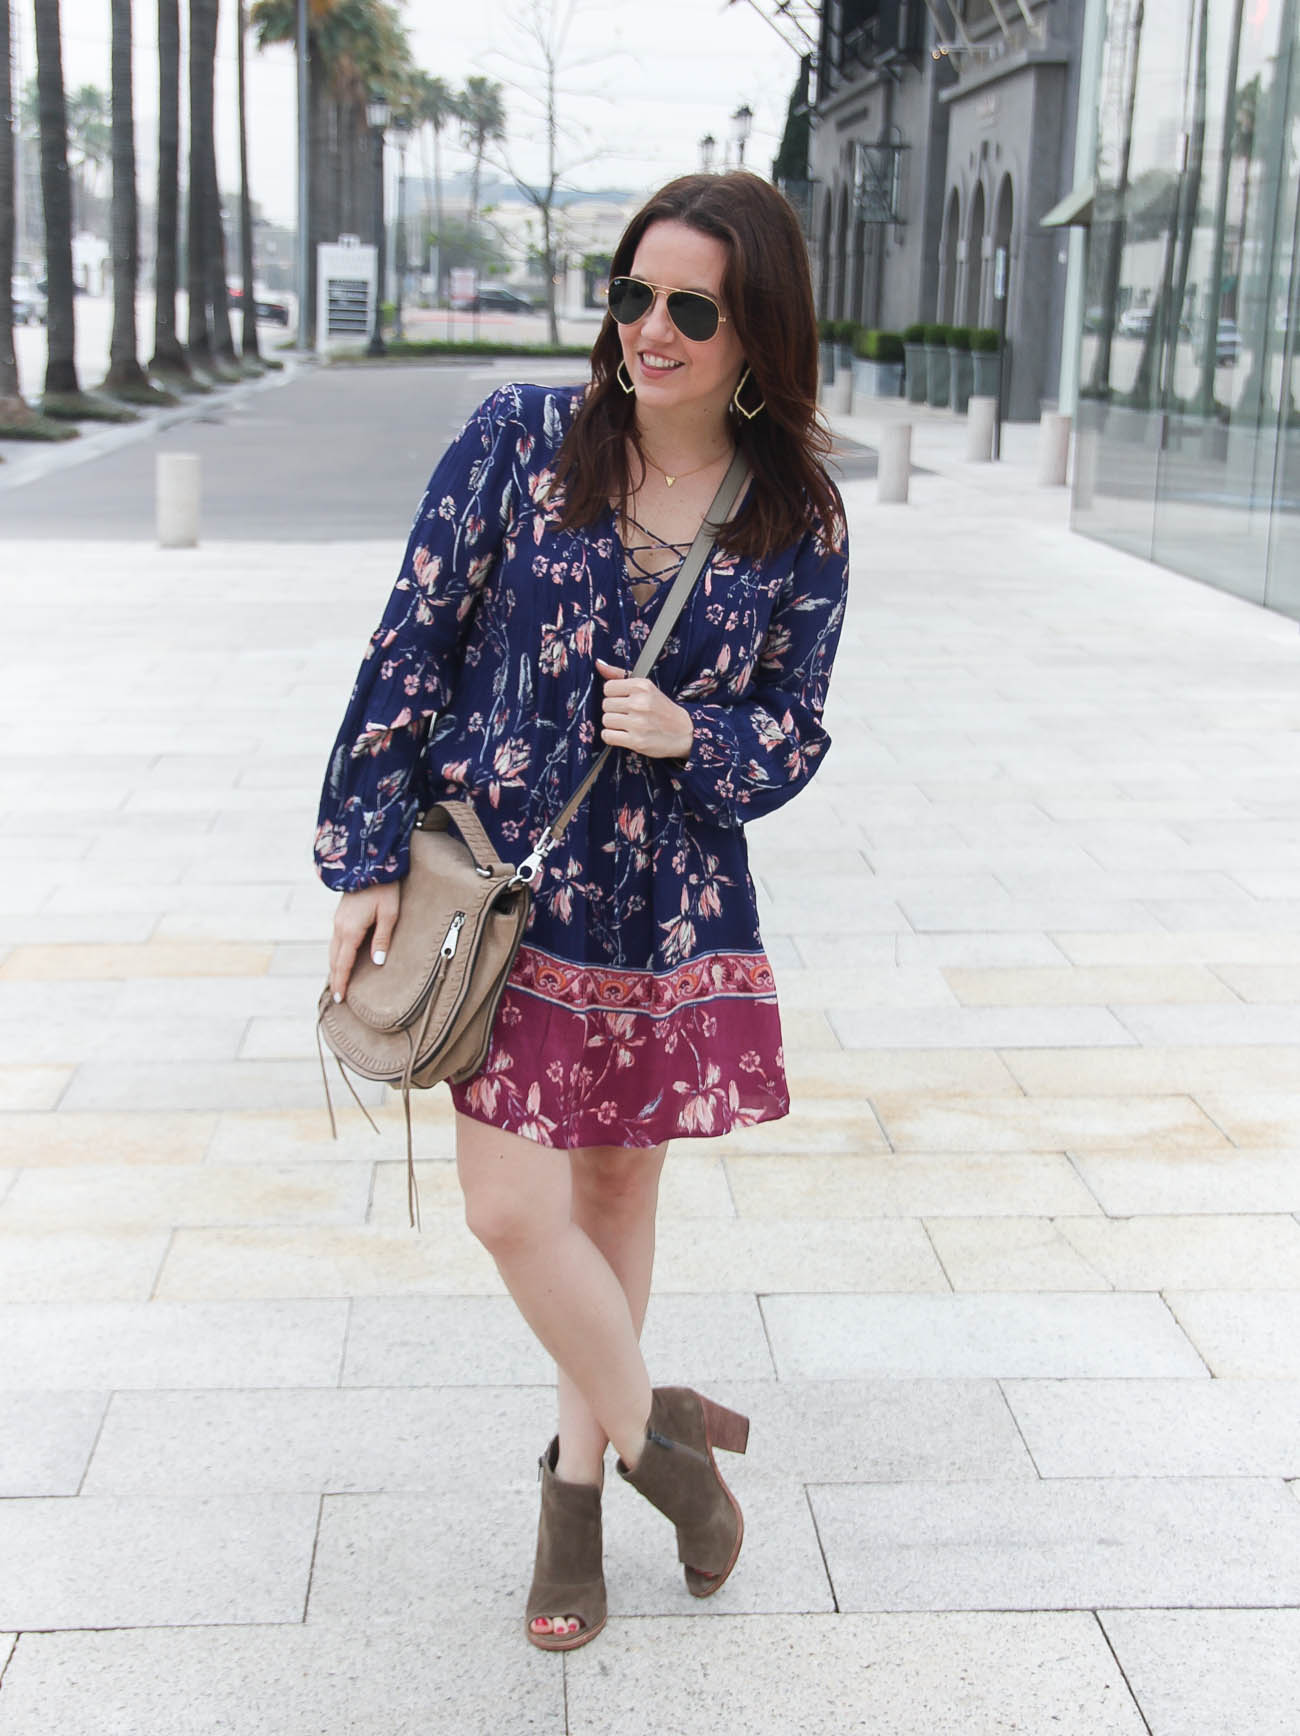 Boho Chic Style  Floral Swing Dress - Lady in VioletLady in Violet